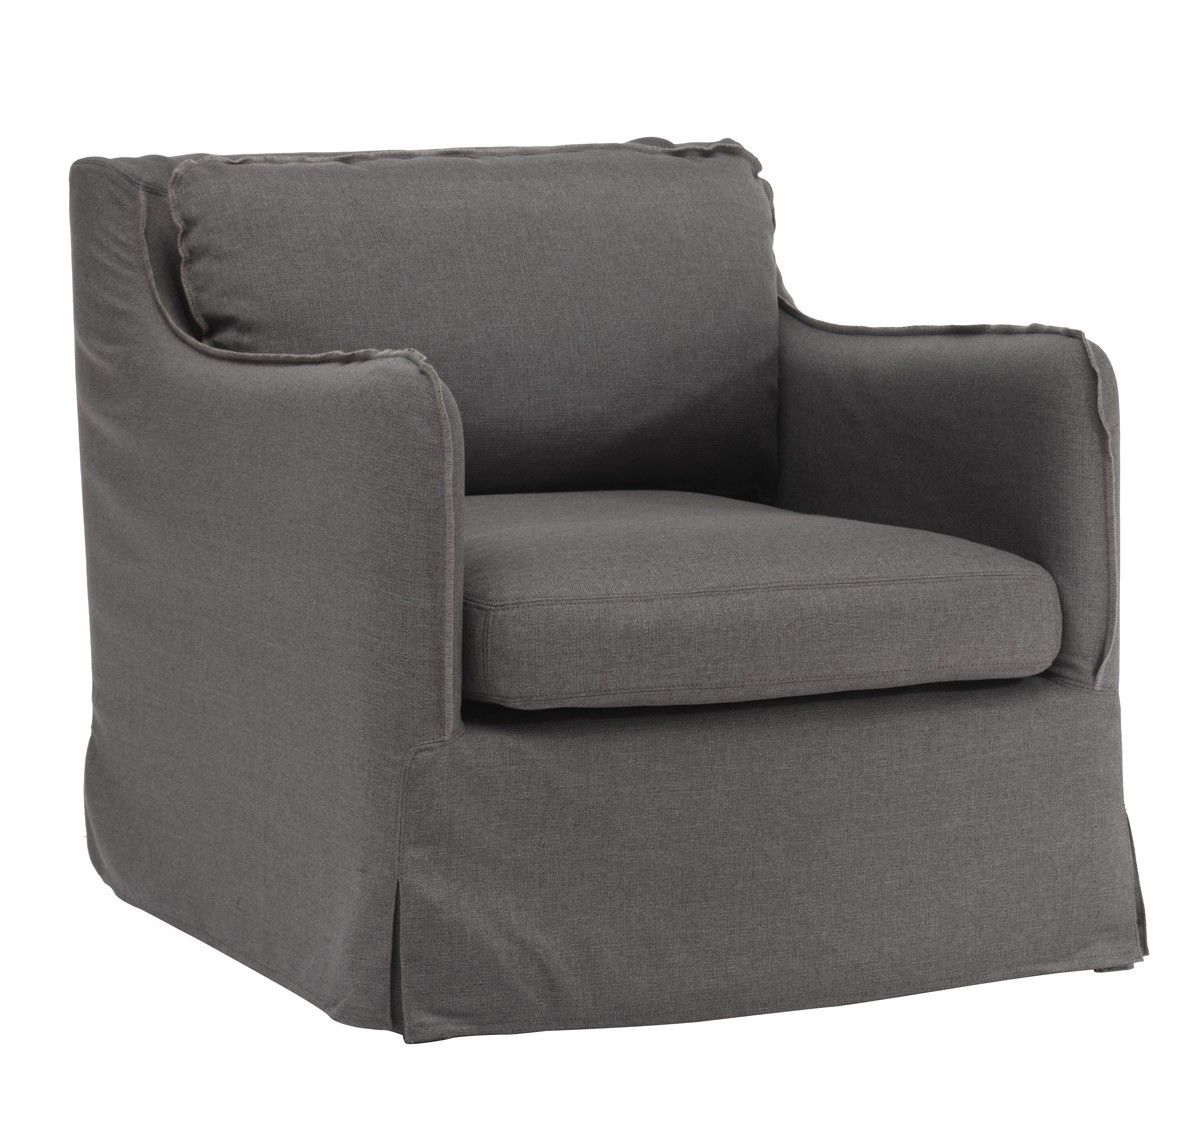 Zuo Modern Pacific Heights Arm Chair - Charcoal Gray